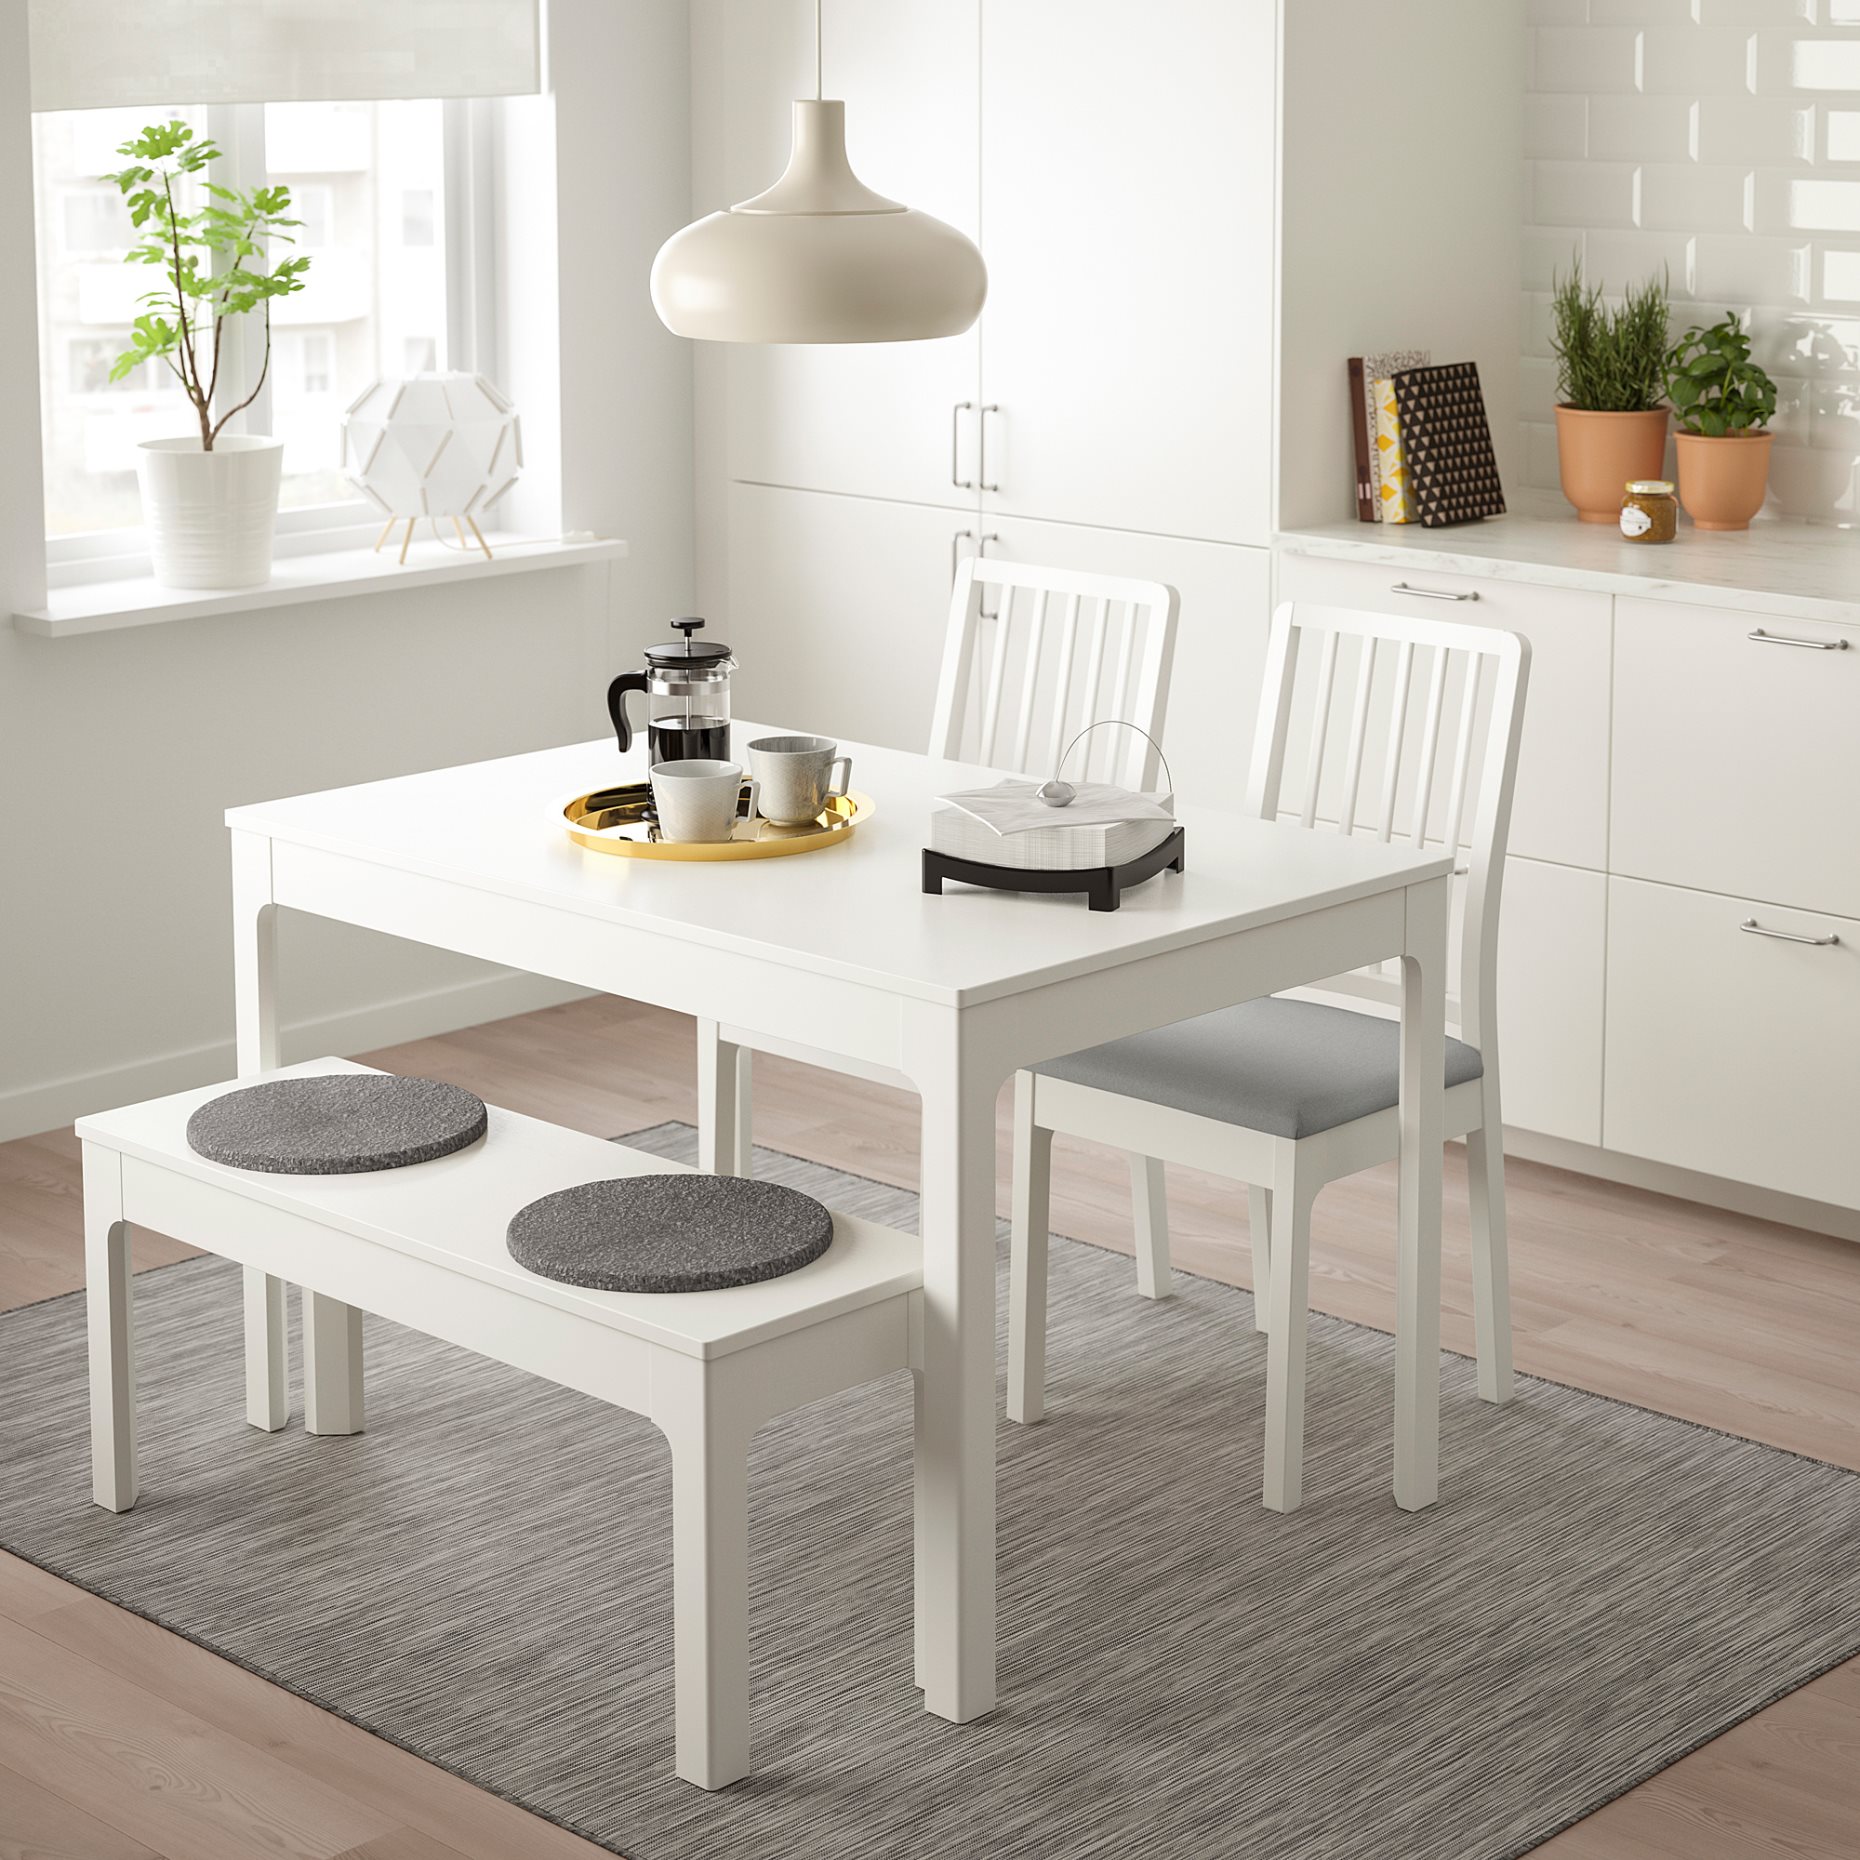 EKEDALEN/EKEDALEN, table with 2 chairs and bench, 992.213.47